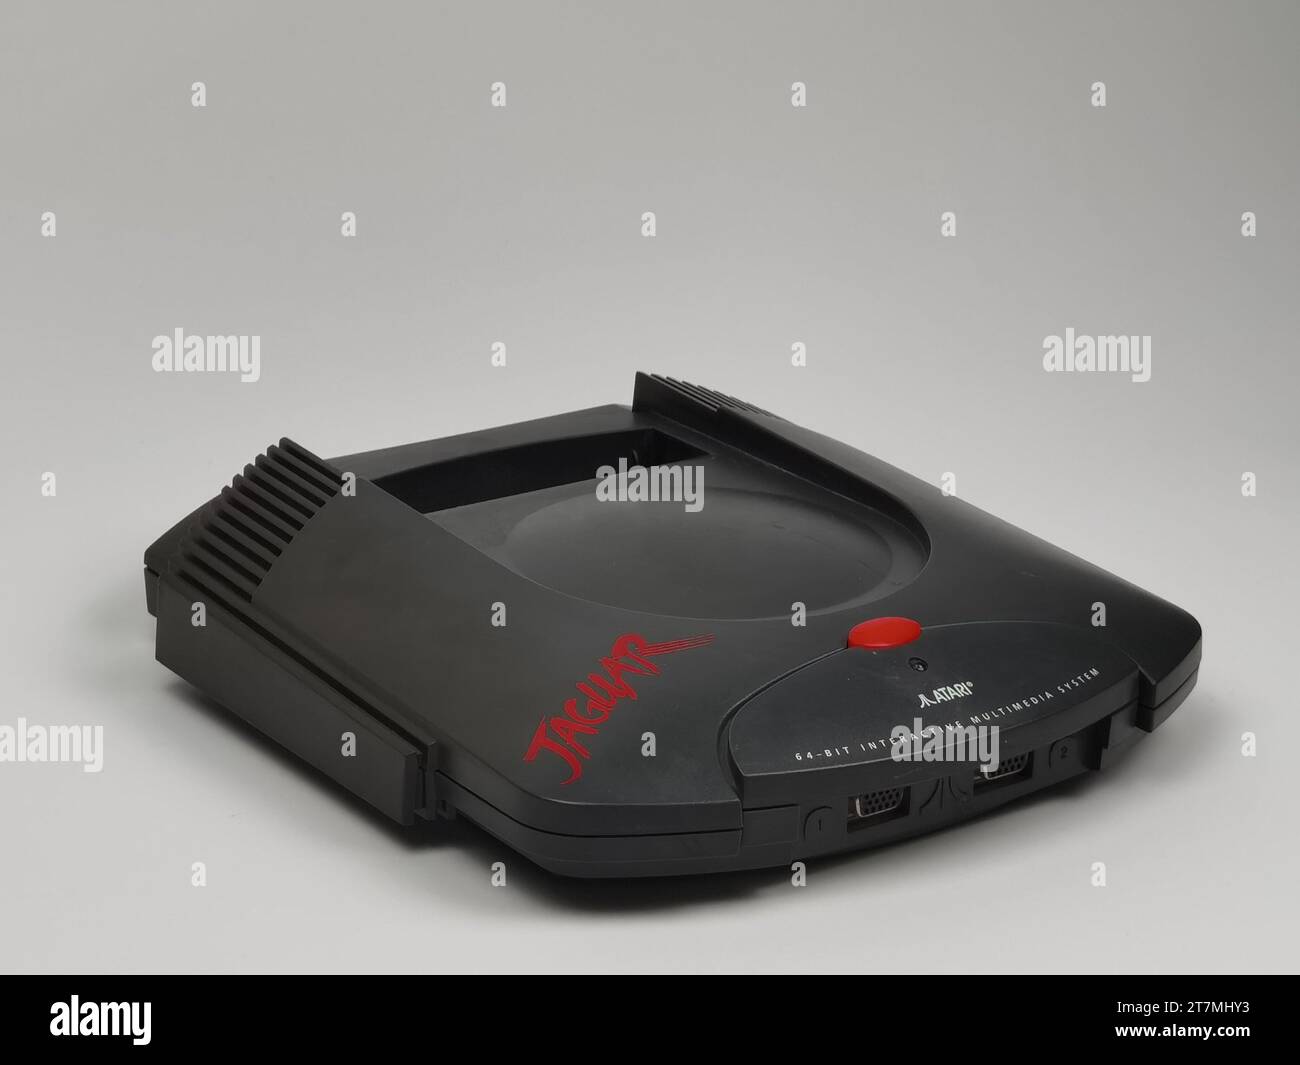 The Atari Jaguar retro gaming system from the side on a white background. Stock Photo